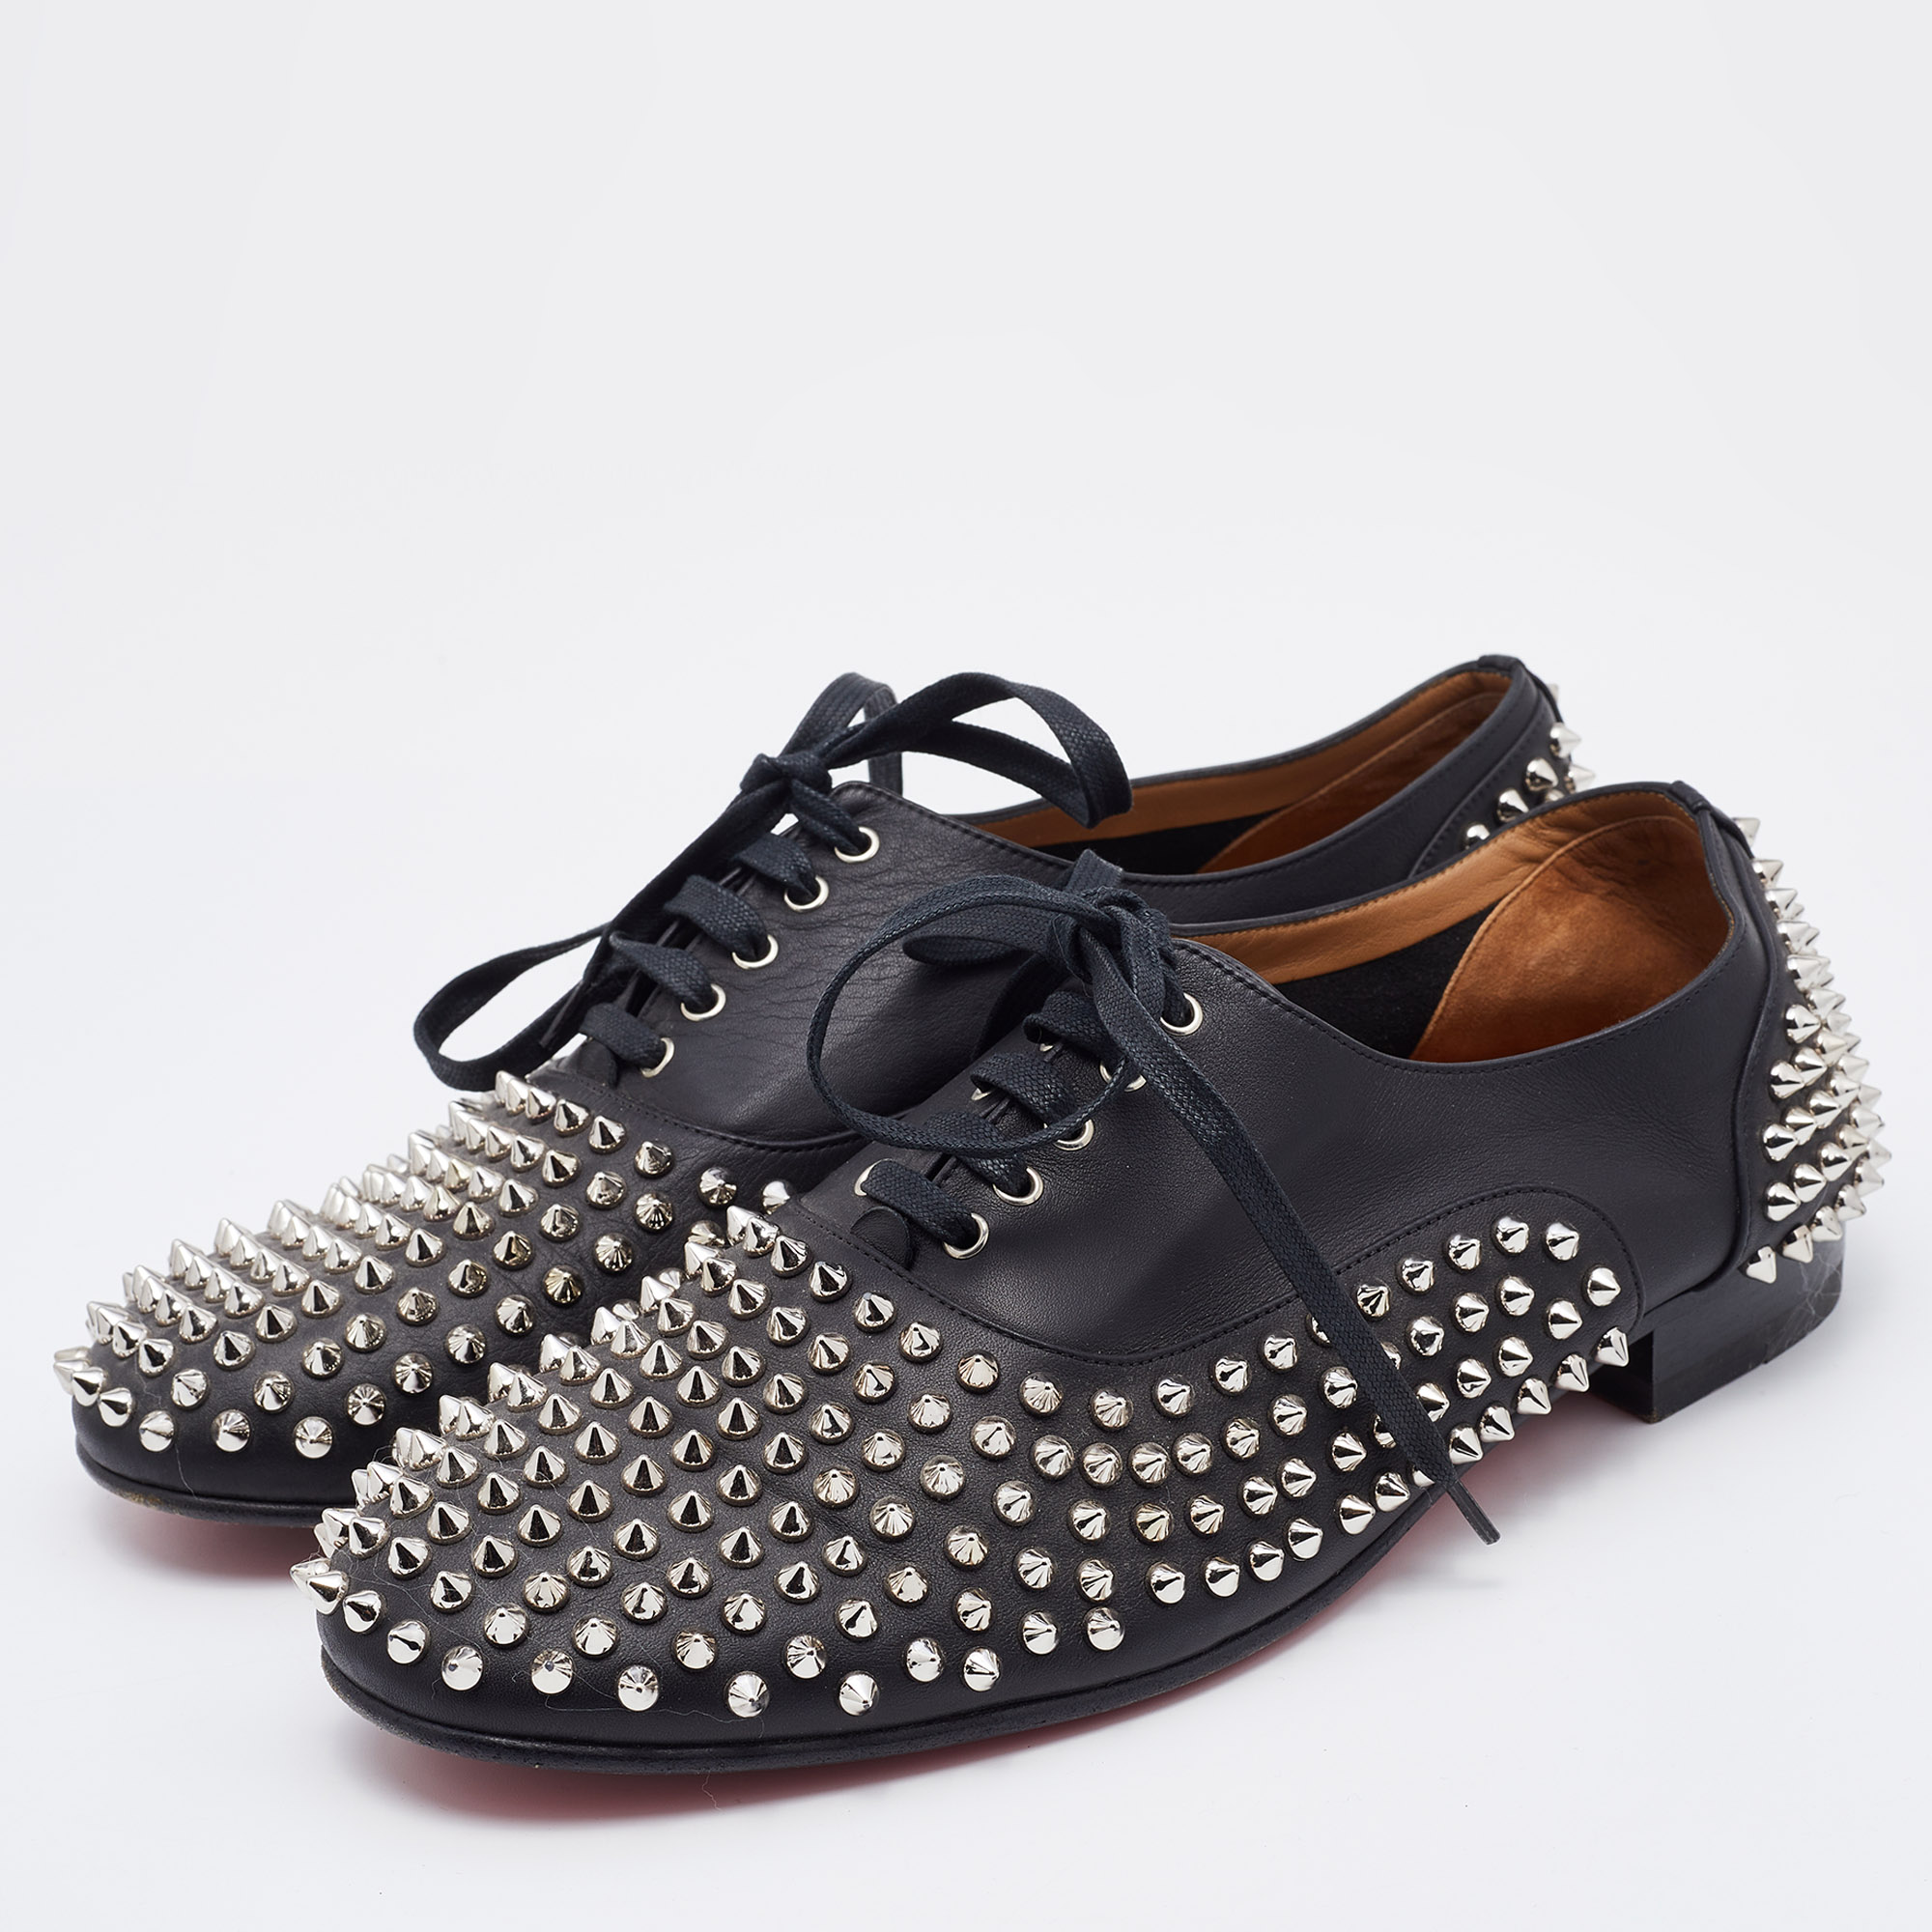 

Christian Louboutin Black Leather Freddy Spikes Lace Up Oxfords Size